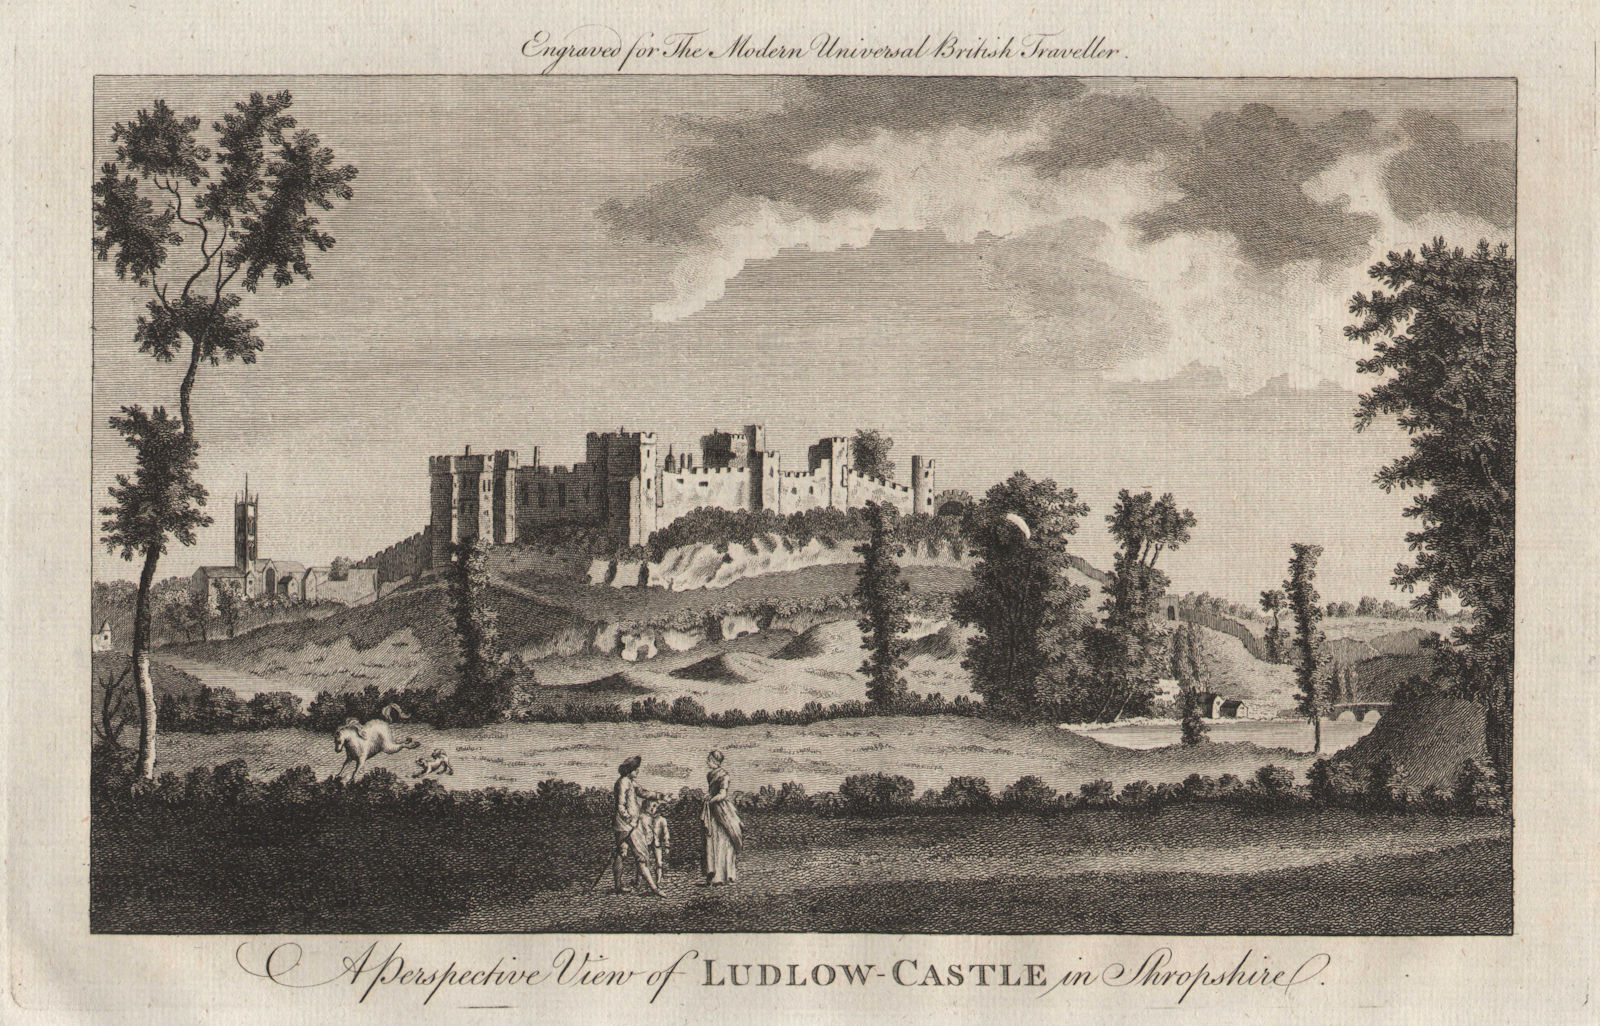 A perspective view of Ludlow Castle in Shropshire. BURLINGTON 1779 old print